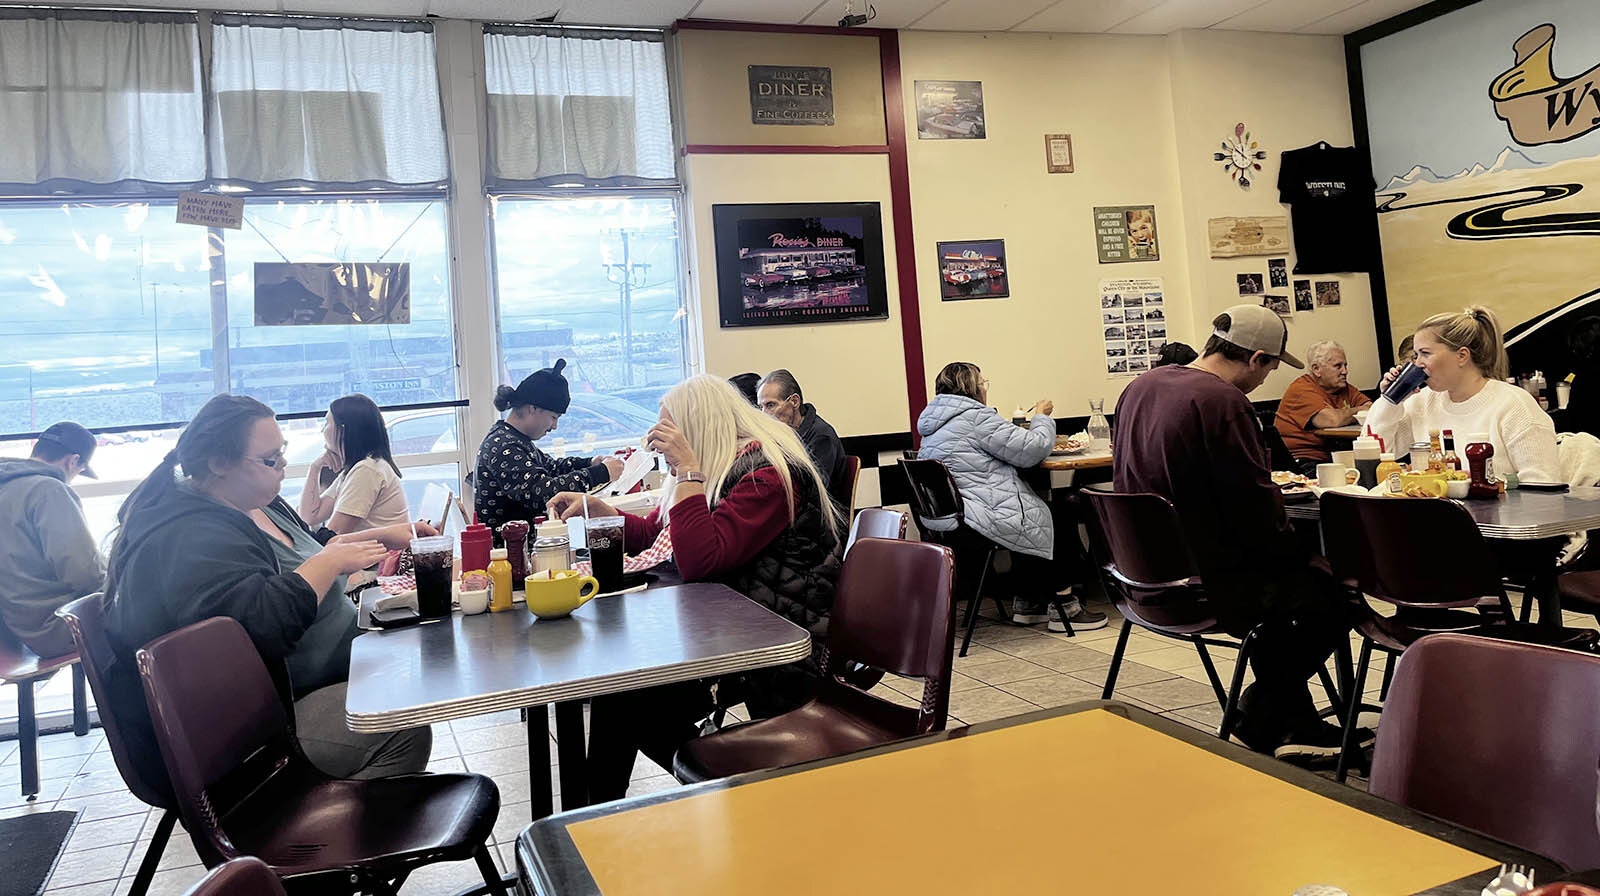 At Jody's Diner, people actually talk to each other.